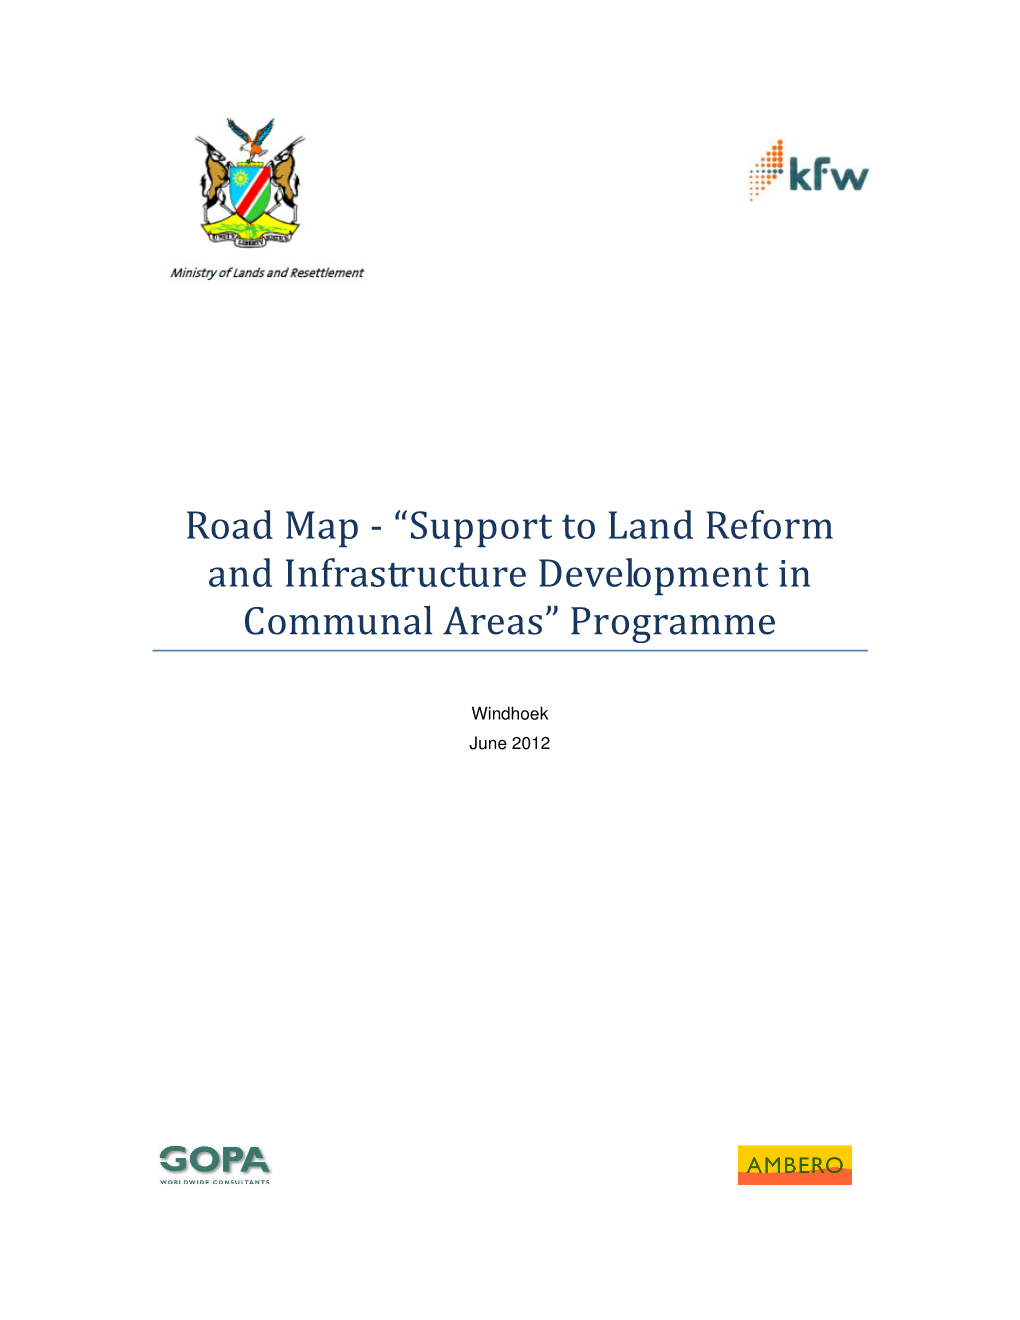 Support to Land Reform and Infrastructure Development in Communal Areas” Programme